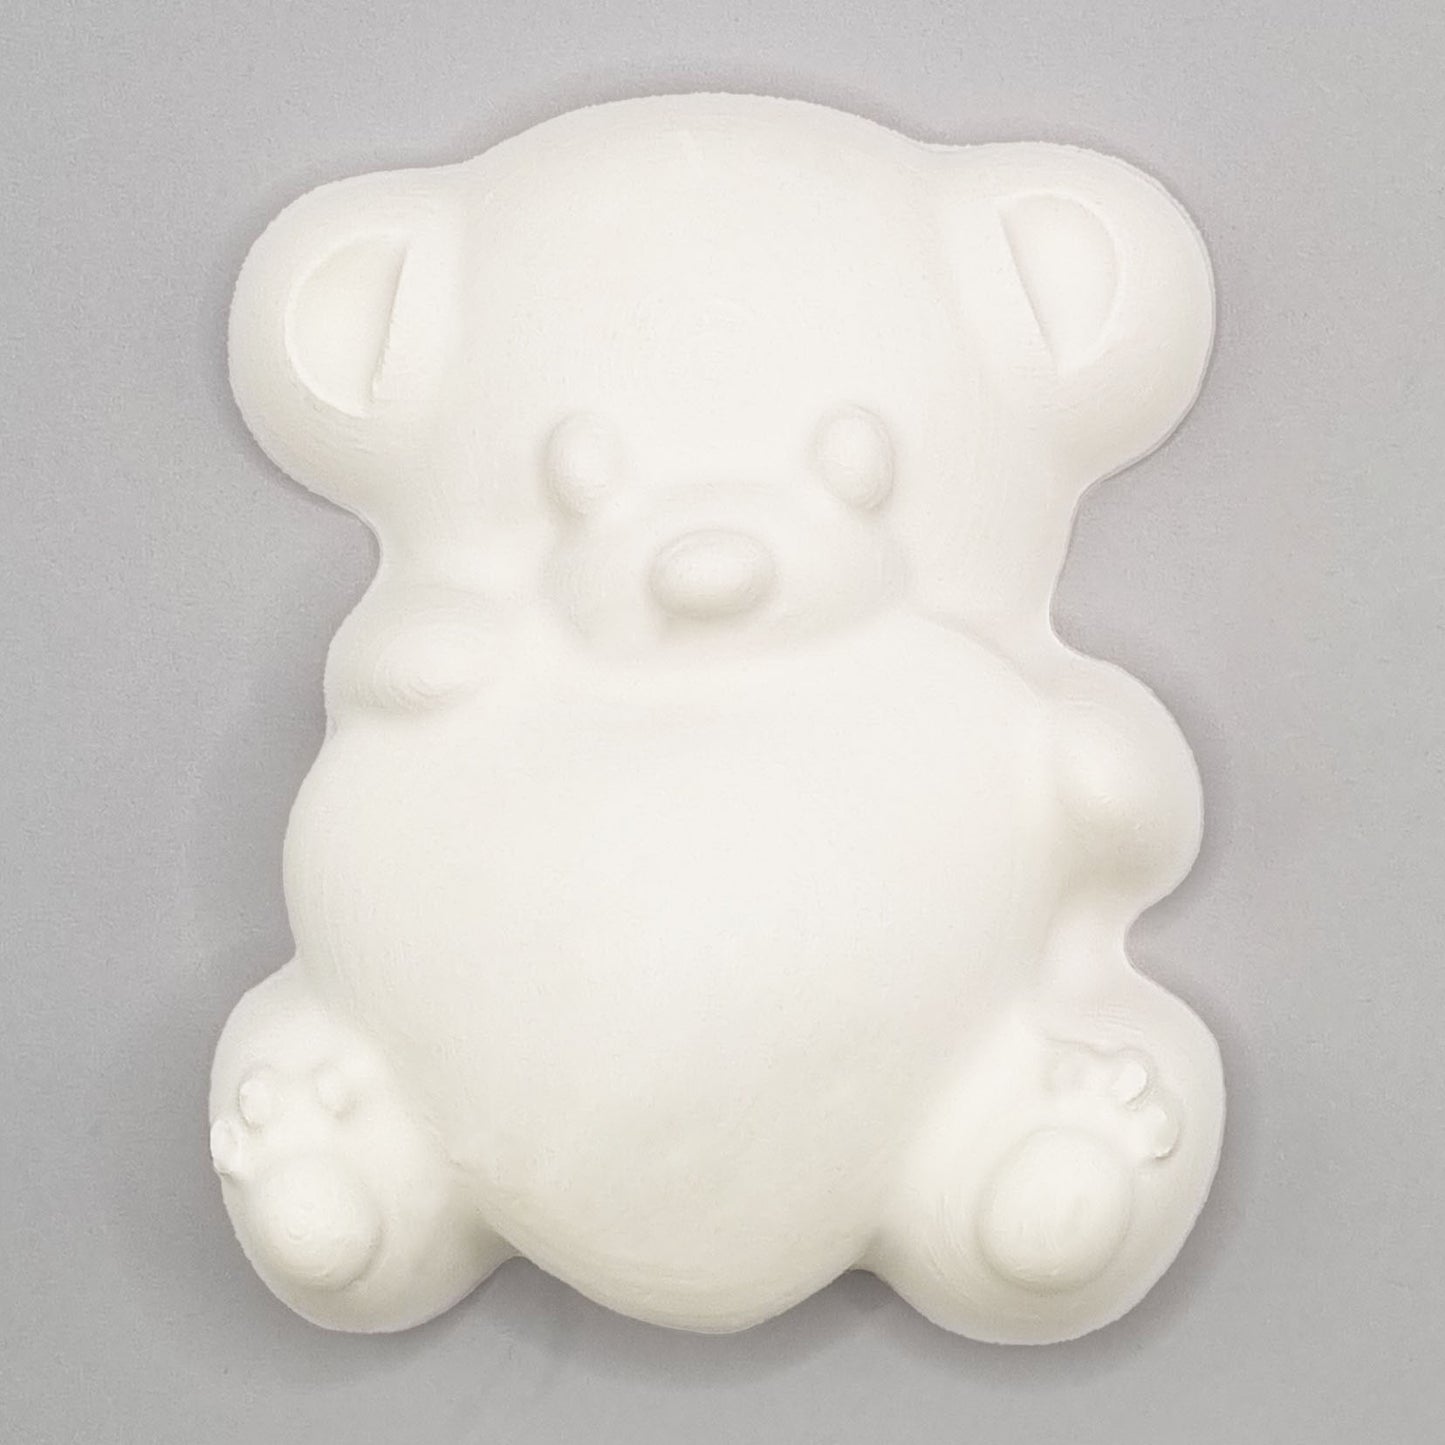 Teddy With Heart Mould | Bath Bomb, Soap | Truly Personal Ltd